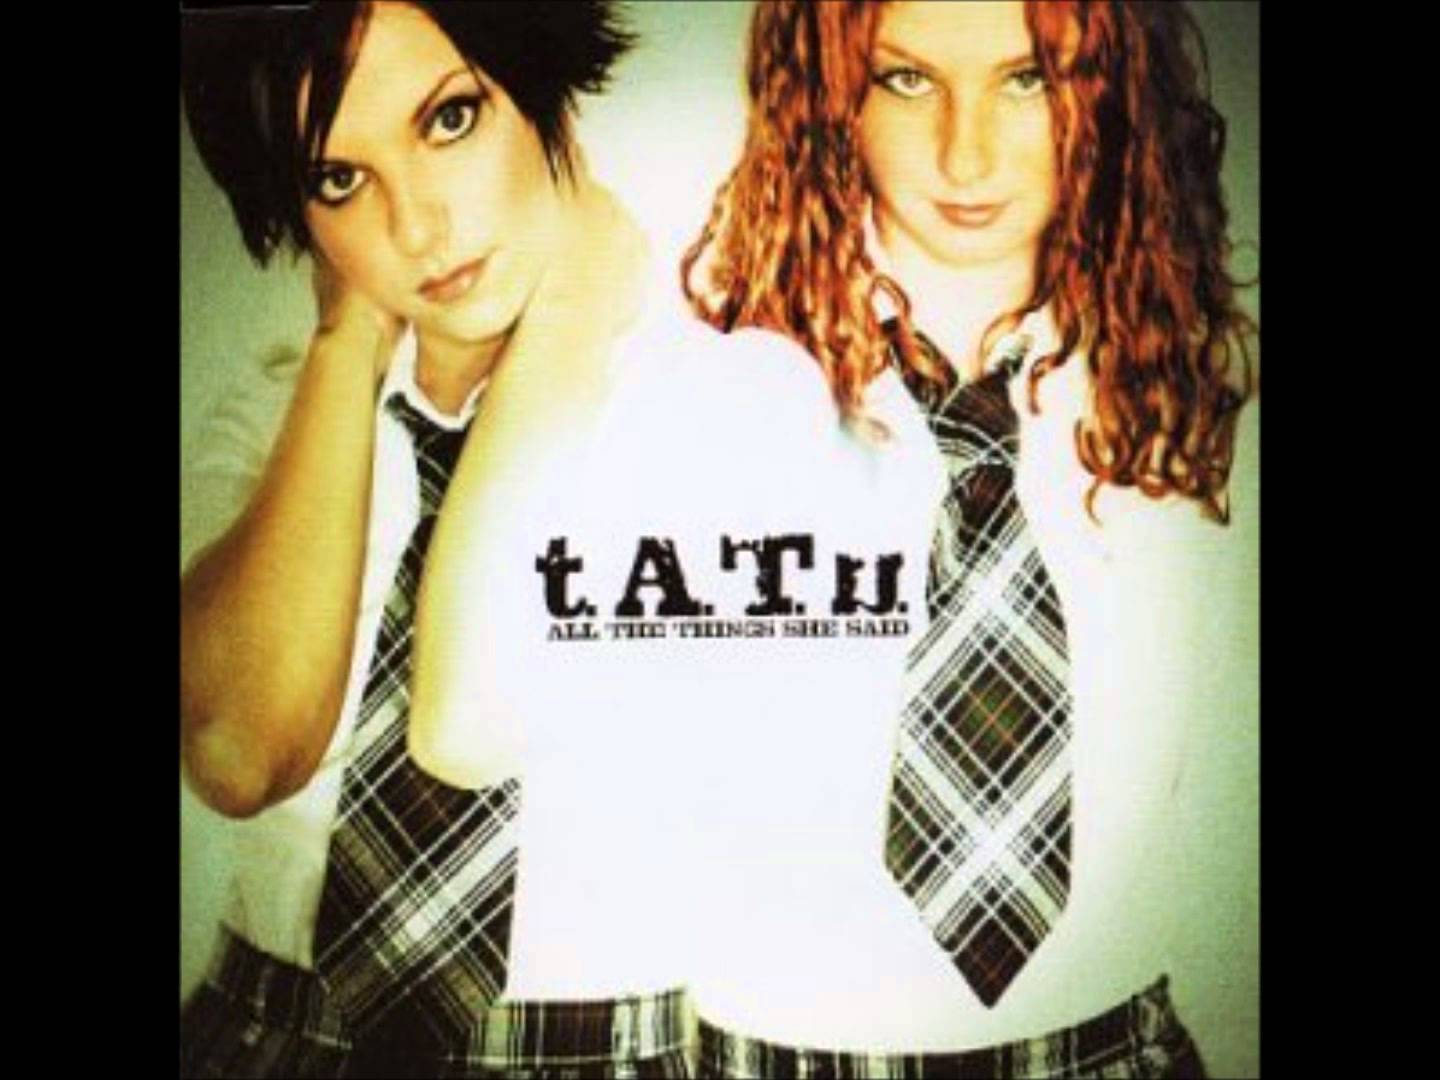 All The Things She Said (t.A.T.u. cover) рисунок